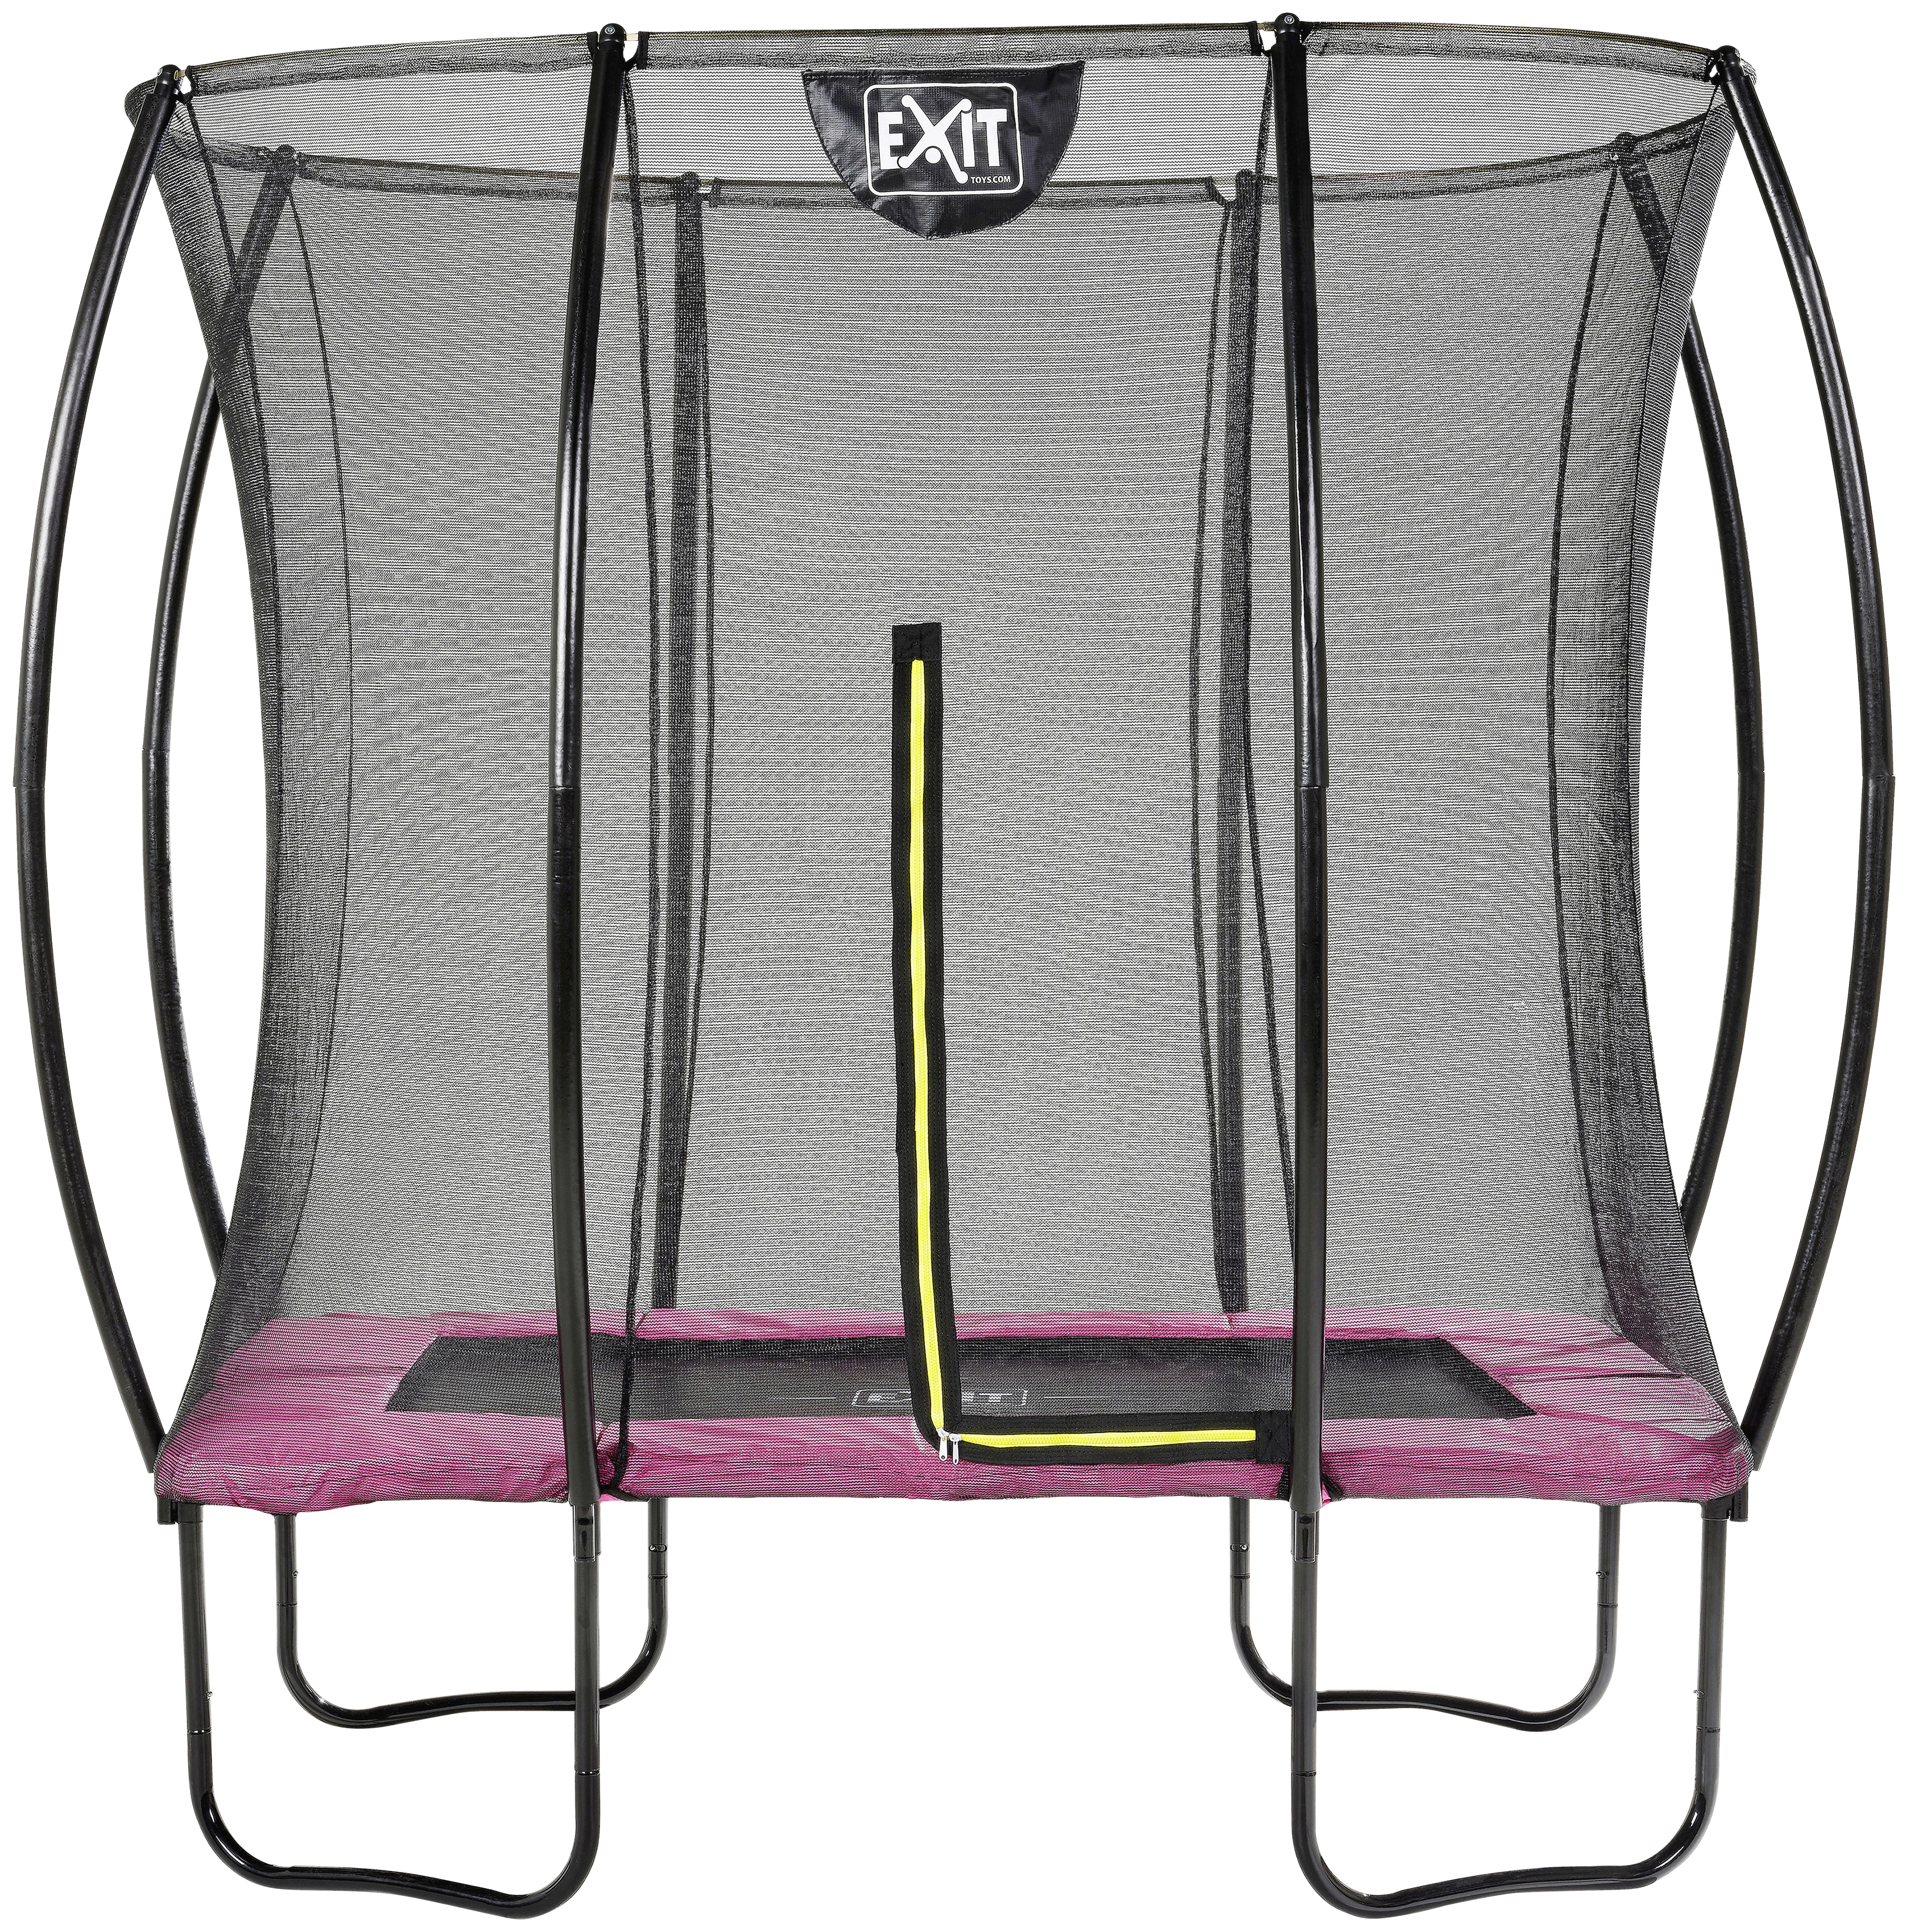 TRAMPOLIN SILHOUETTE 153X214 153/214 cm Pink  - Pink, KONVENTIONELL, Metall (153/214cm) - Dutch Toys Group